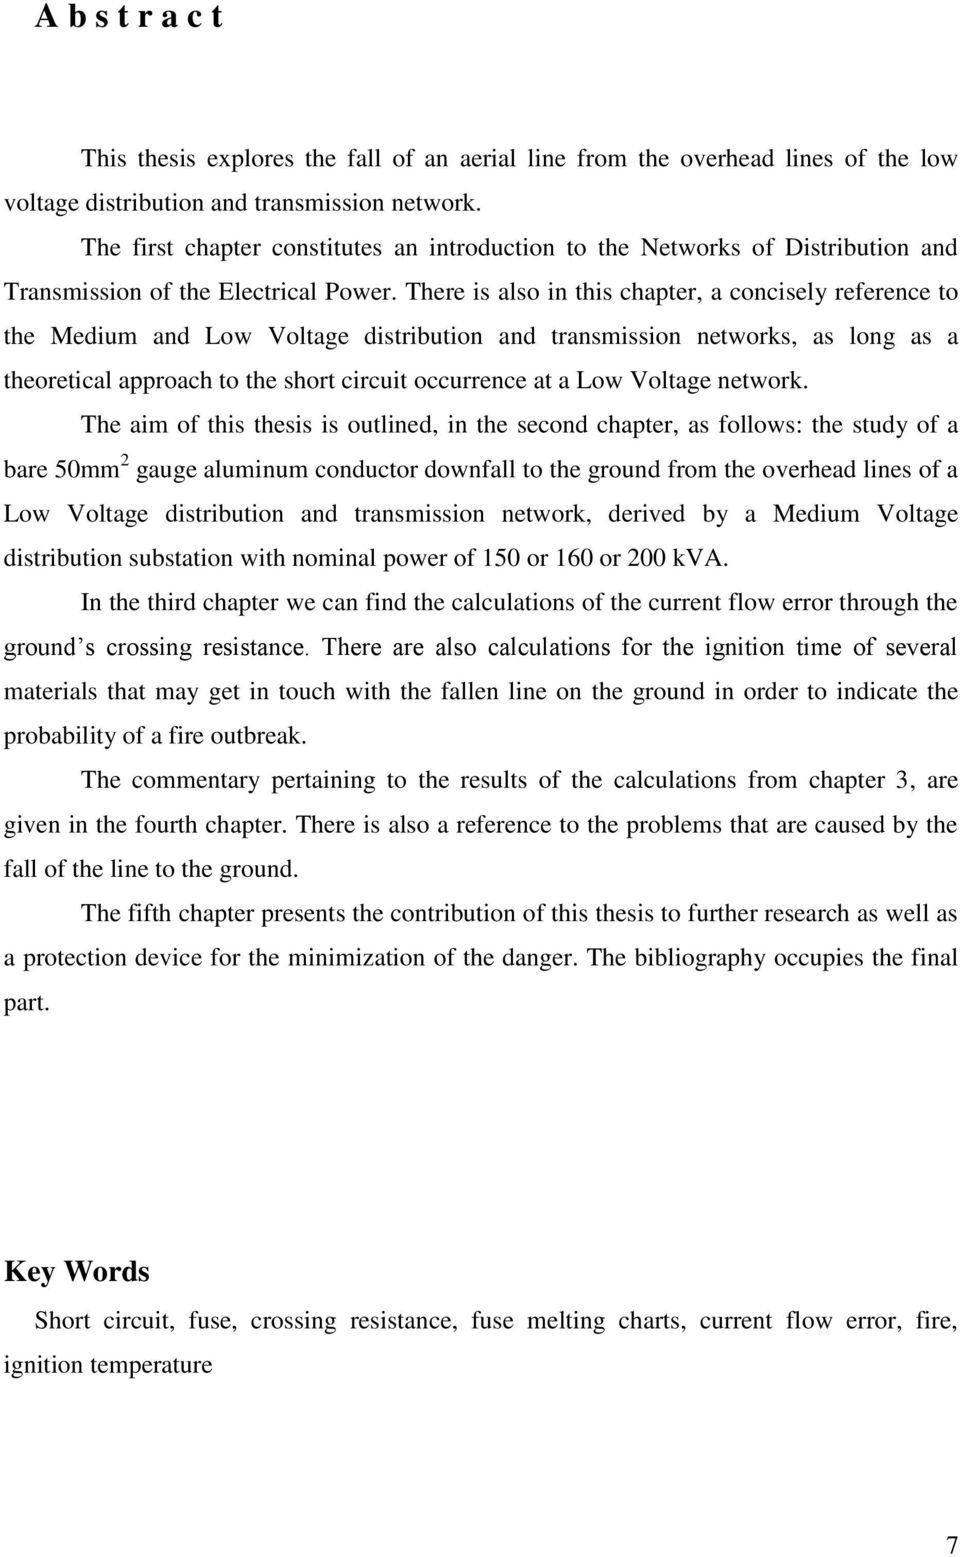 There is also in this chapter, a concisely reference to the Medium and Low Voltage distribution and transmission networks, as long as a theoretical approach to the short circuit occurrence at a Low